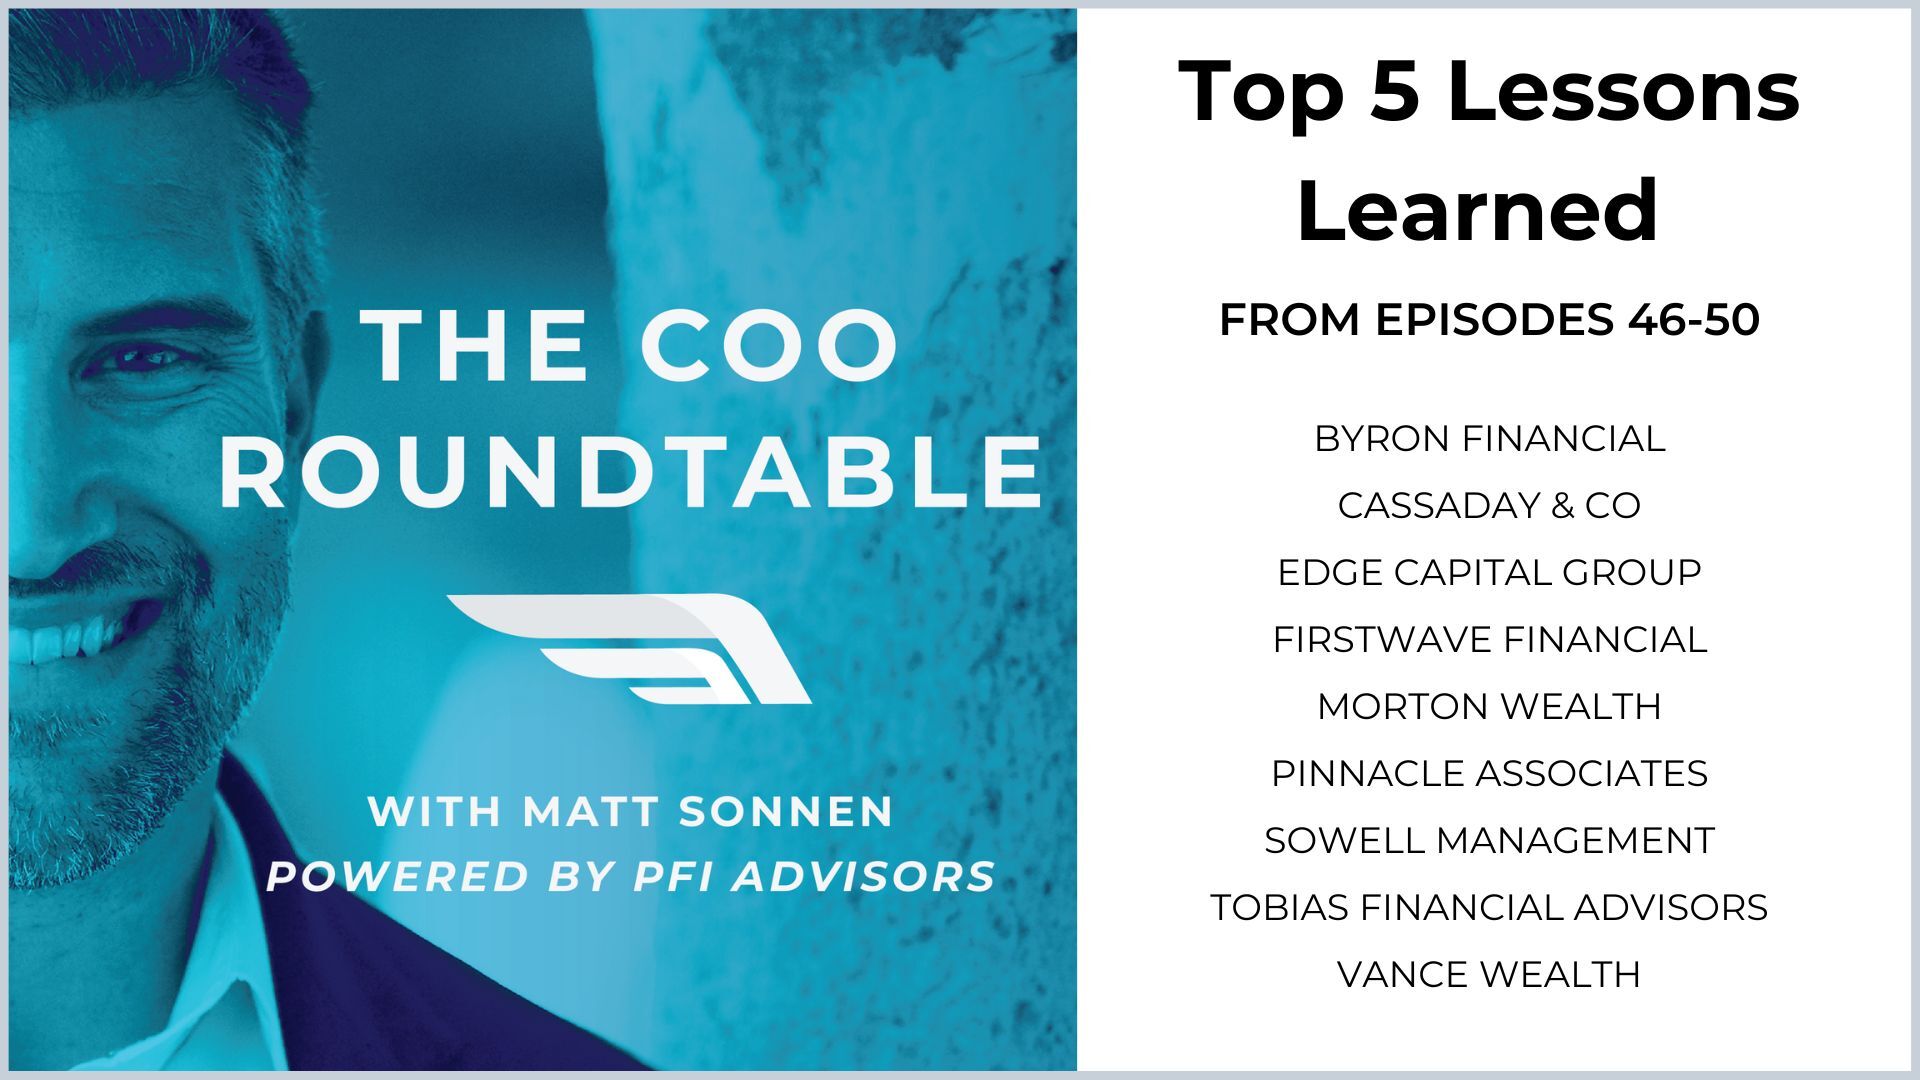 Top 5 Lessons Learned from Episodes 46-50 of The COO Roundtable